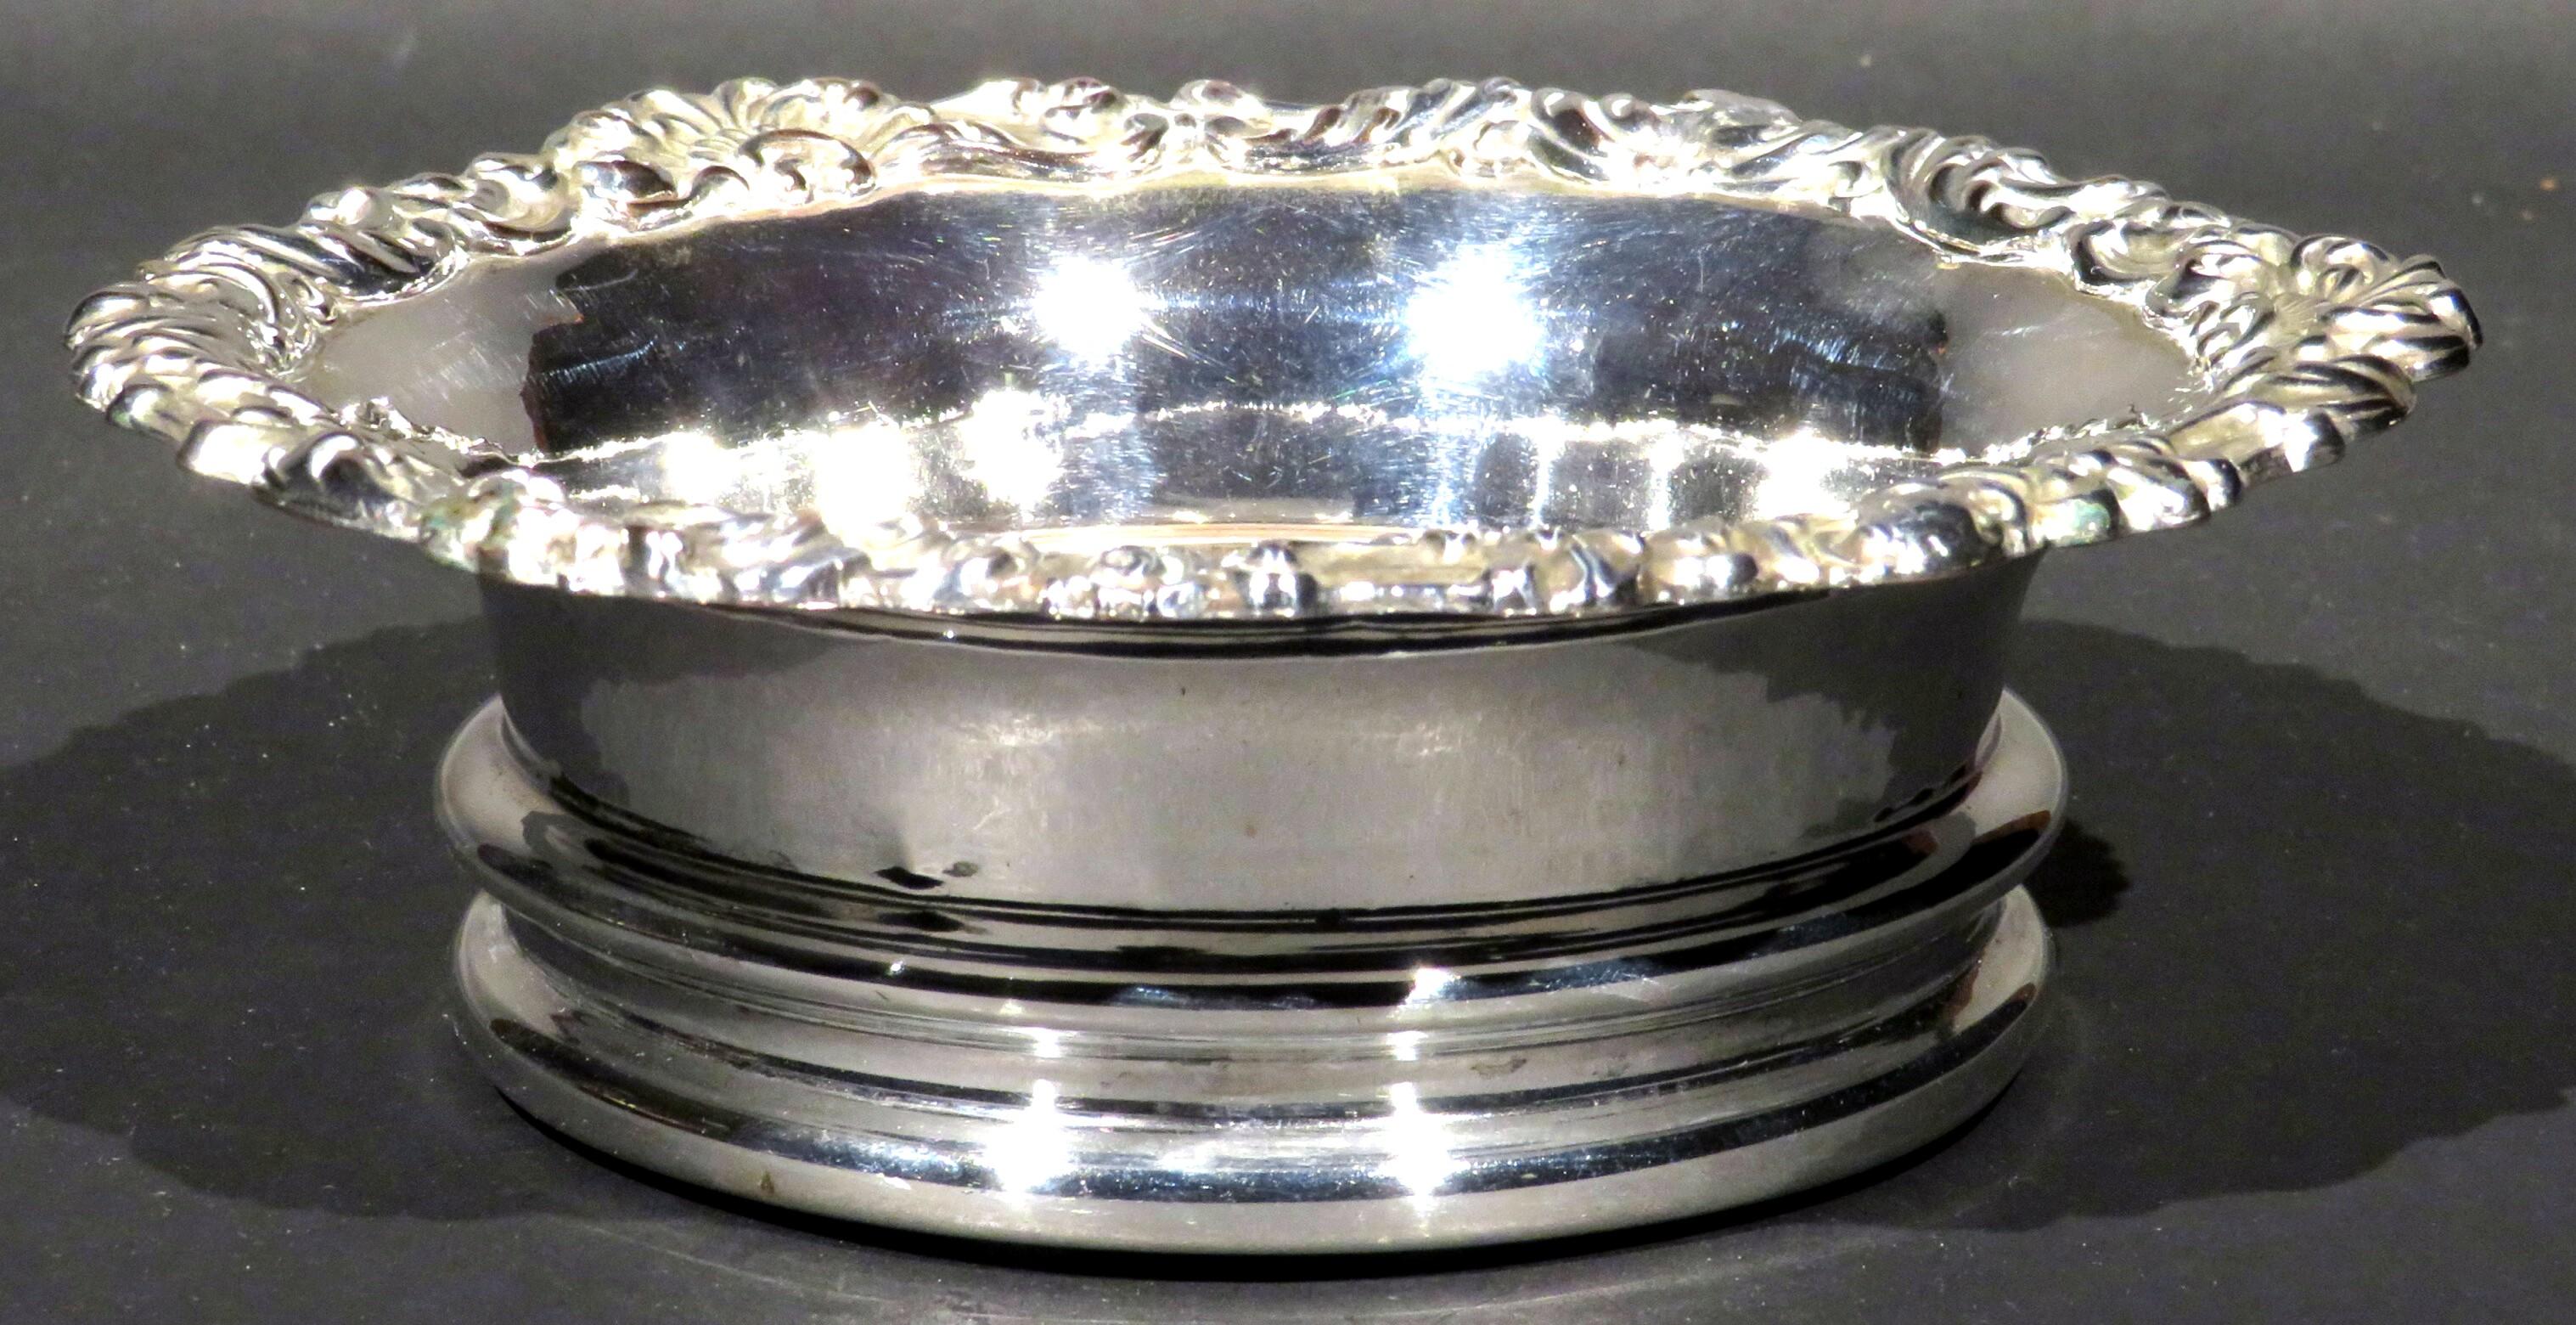 Victorian A Mid 19th Century Silver Plated Spirit Decanter Coaster, English Circa 1840 For Sale